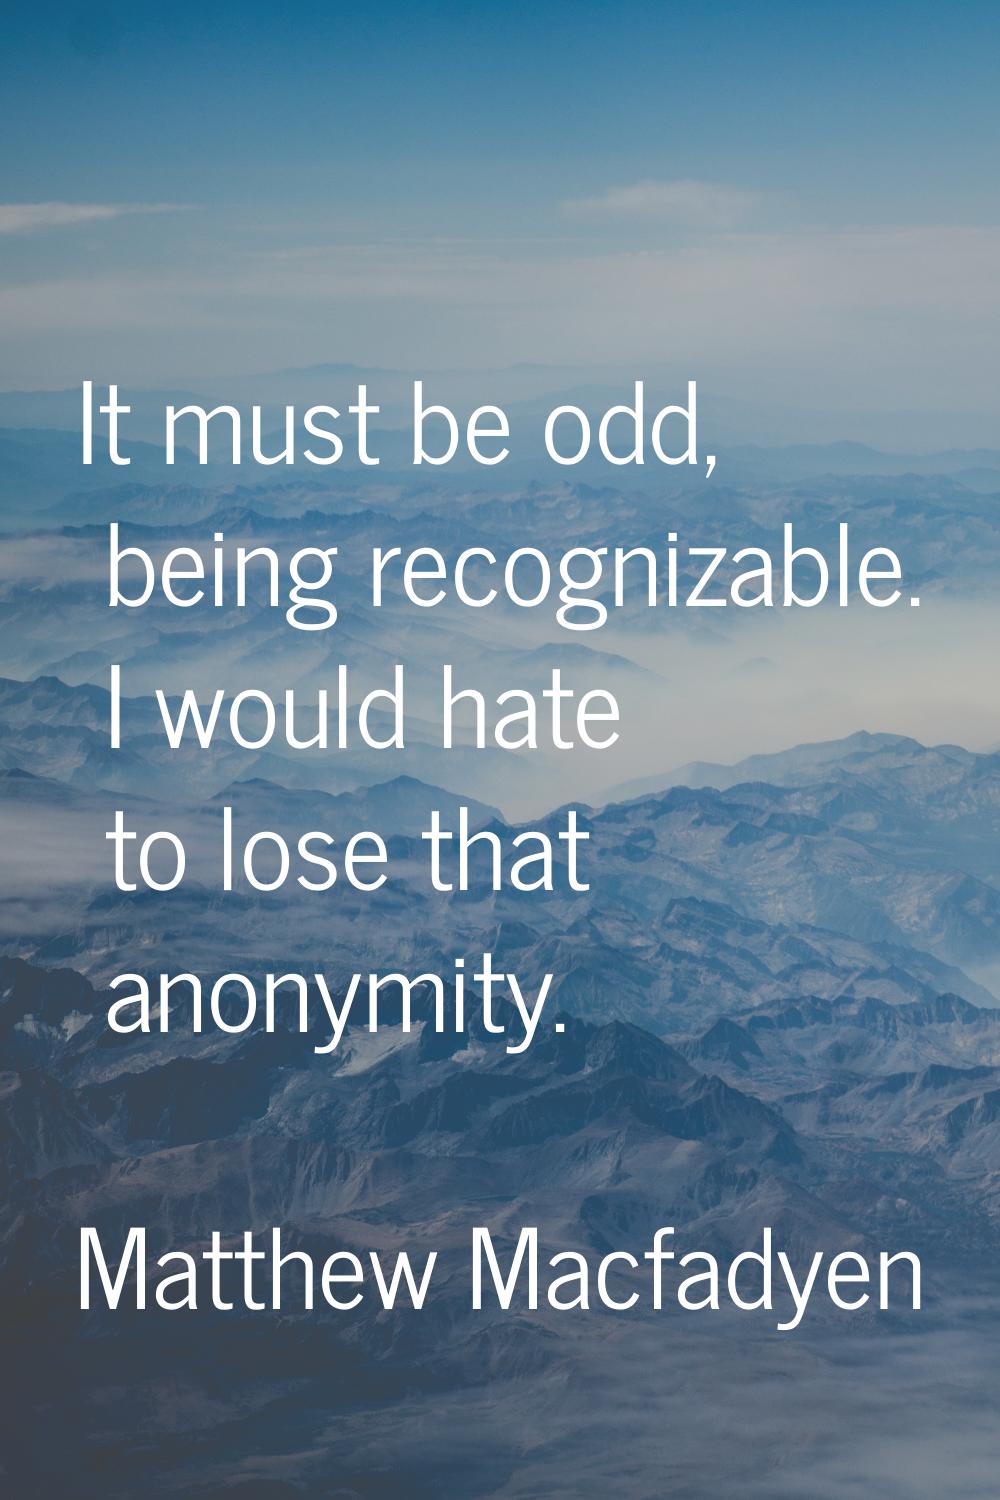 It must be odd, being recognizable. I would hate to lose that anonymity.